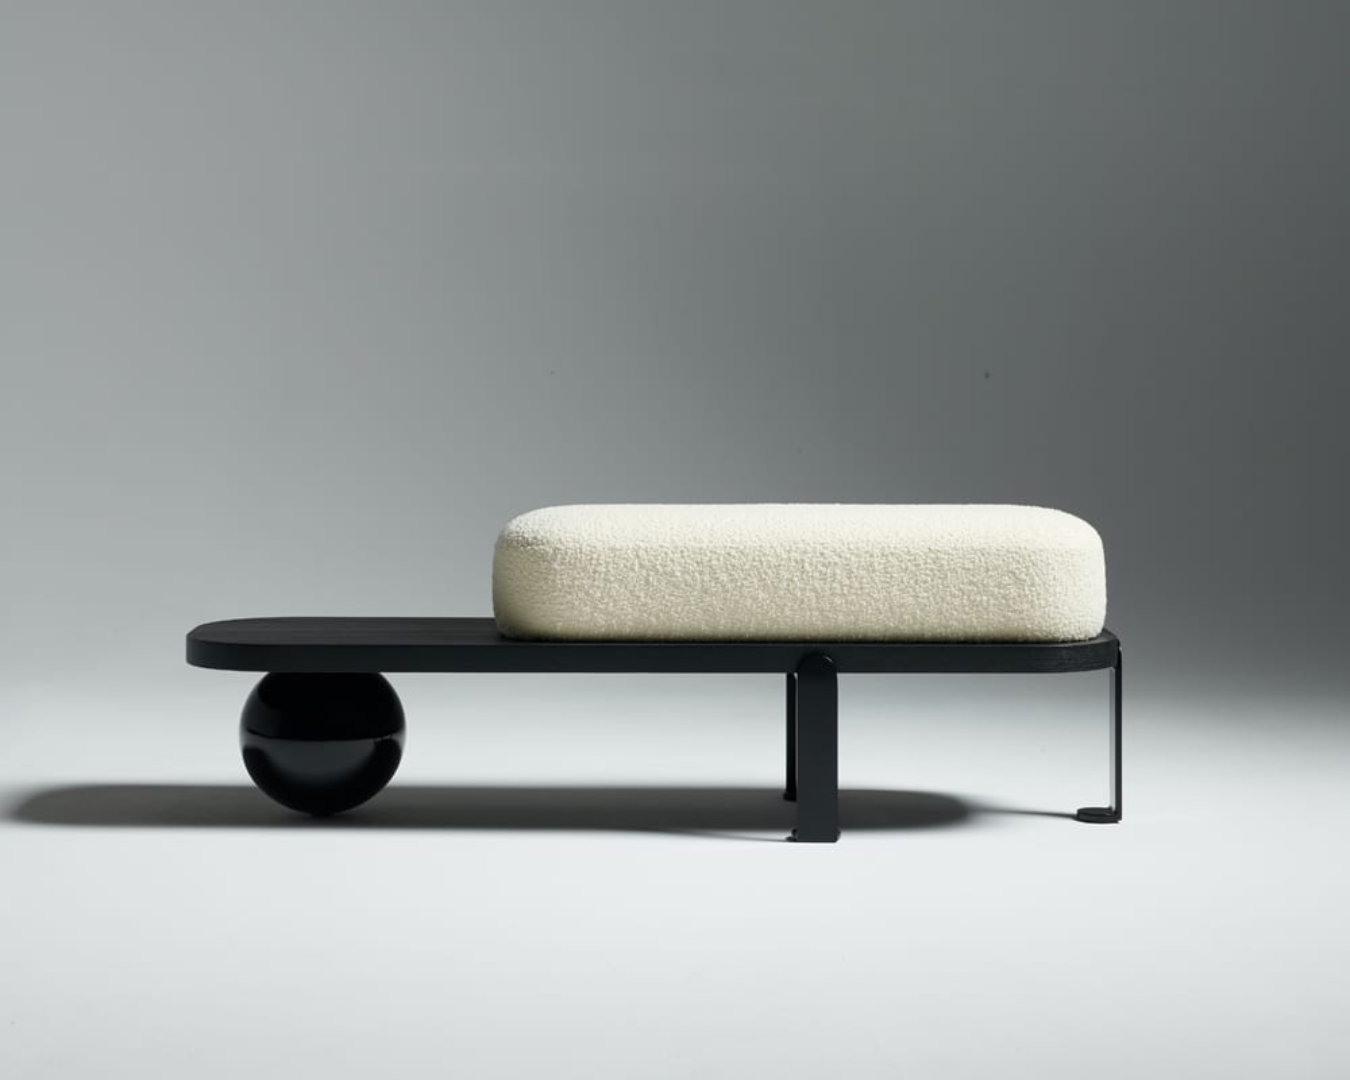 Goa Bench, By Le Berre Vevaud